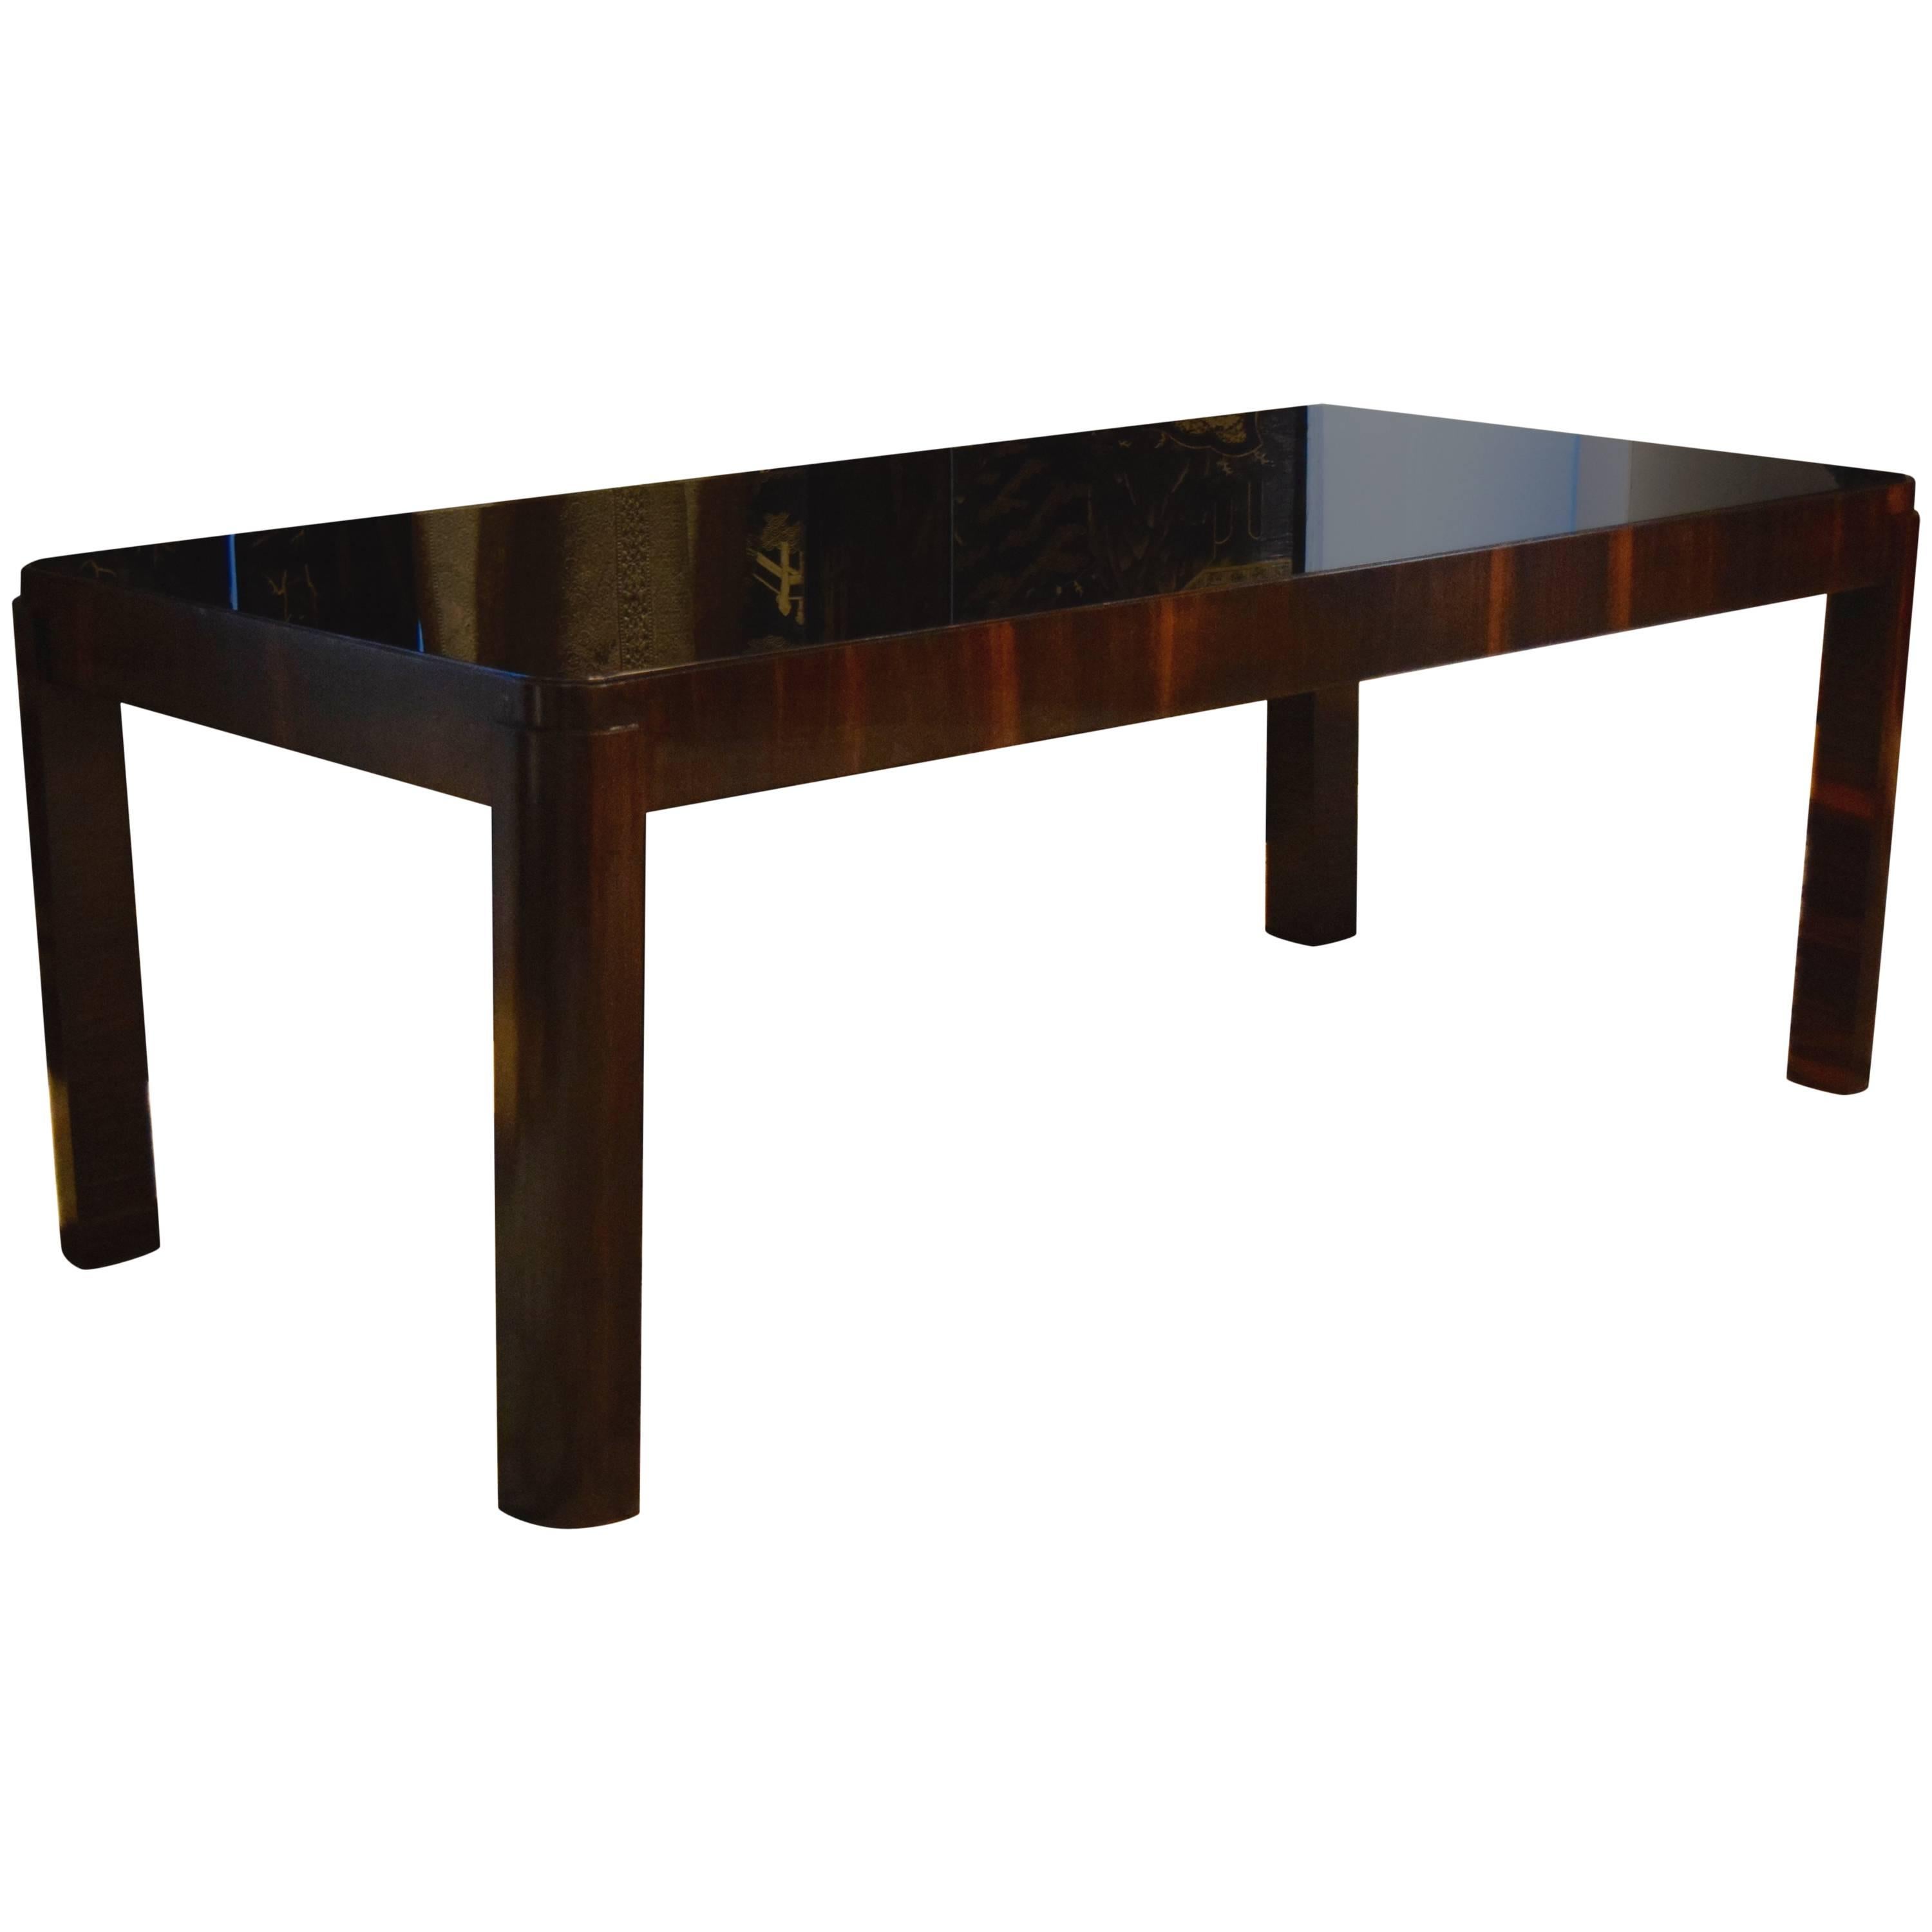 American Art Deco Table Attributed to Eugene Schoen For Sale at 1stDibs